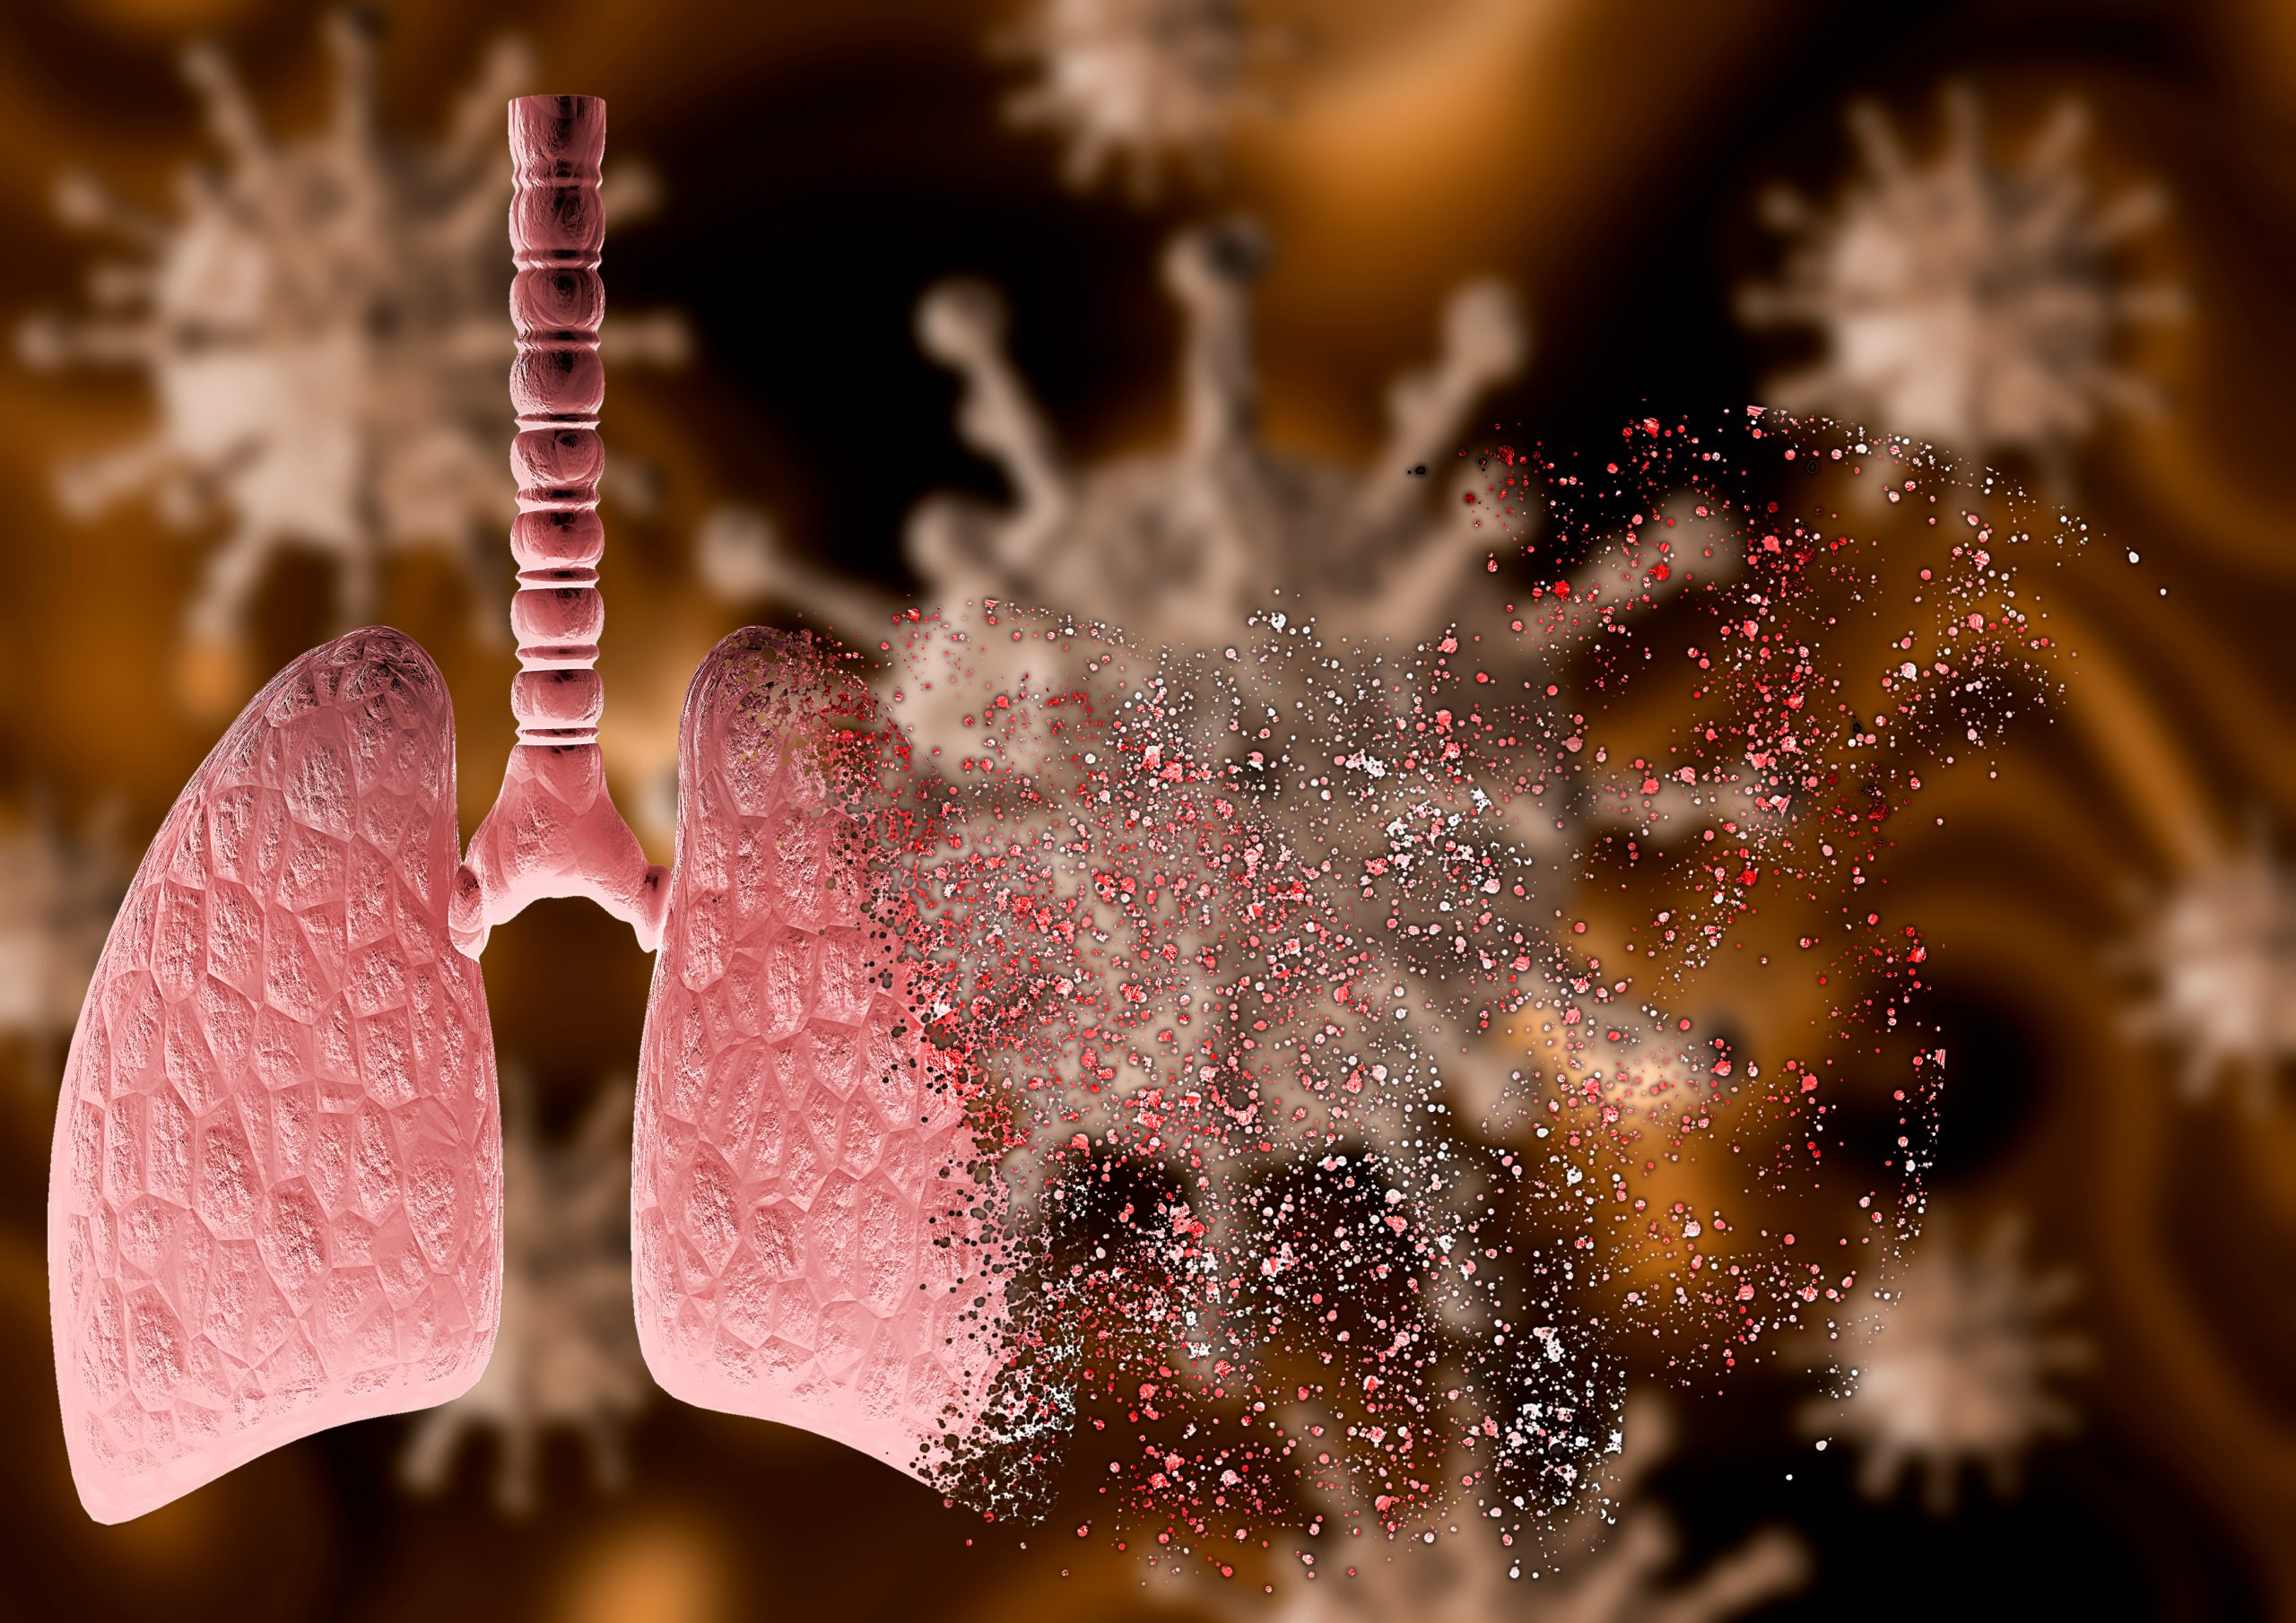 COVID-19 and our lungs: Double the viral load and a glitch in the immune system